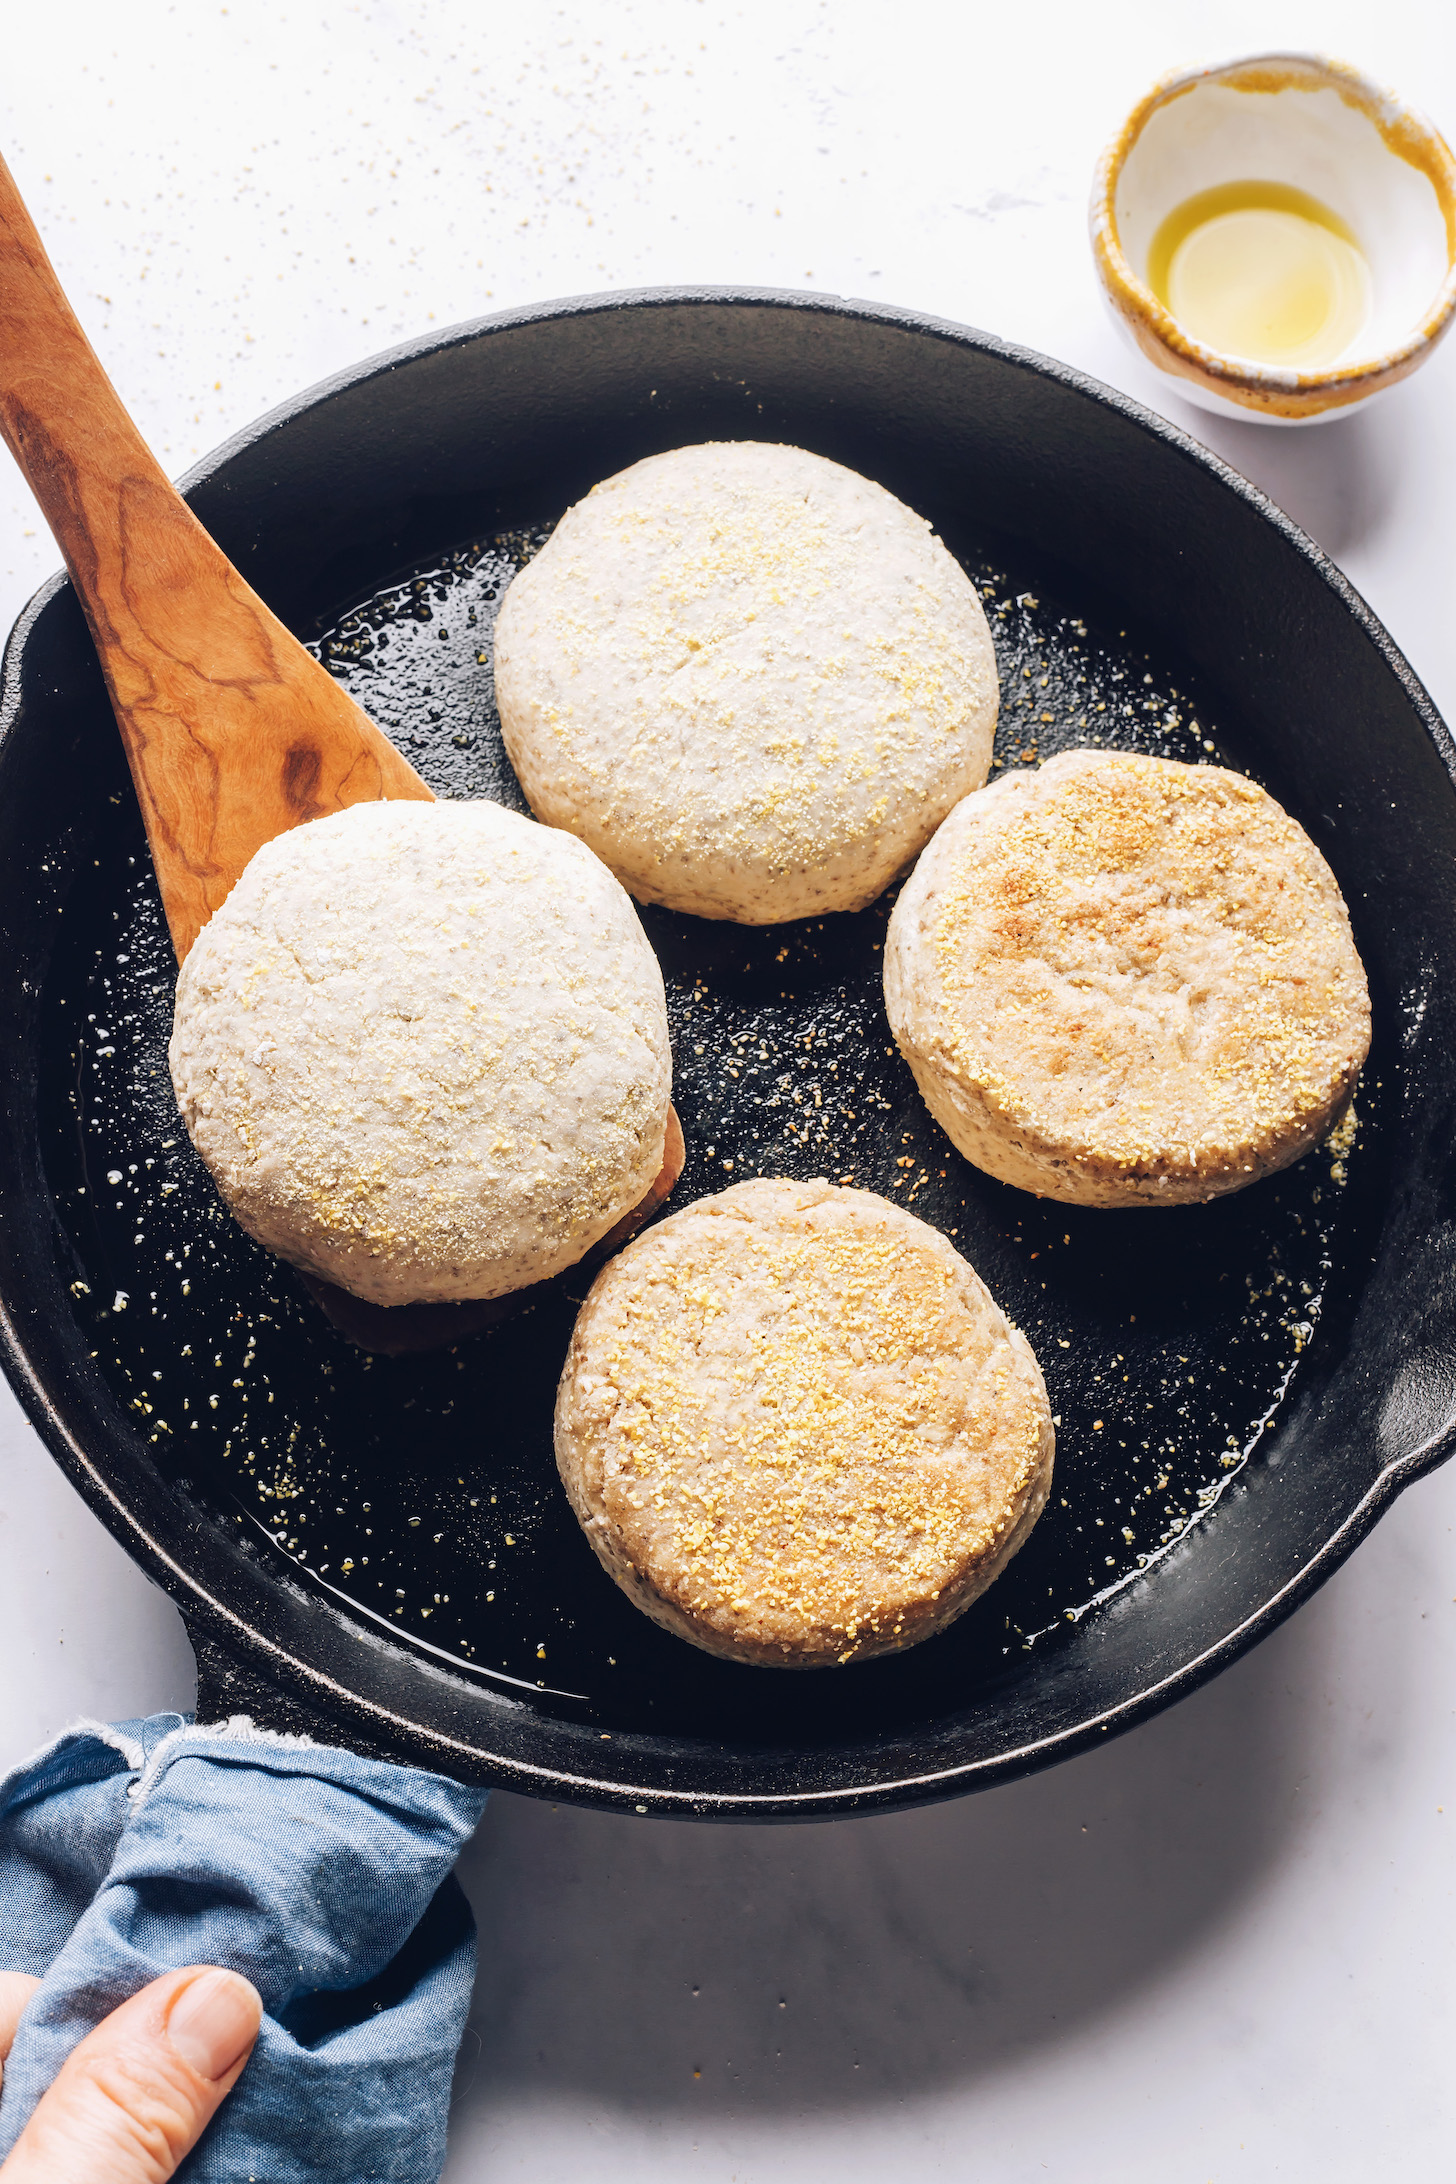 Cooking gluten-free English muffins in a cast iron skillet